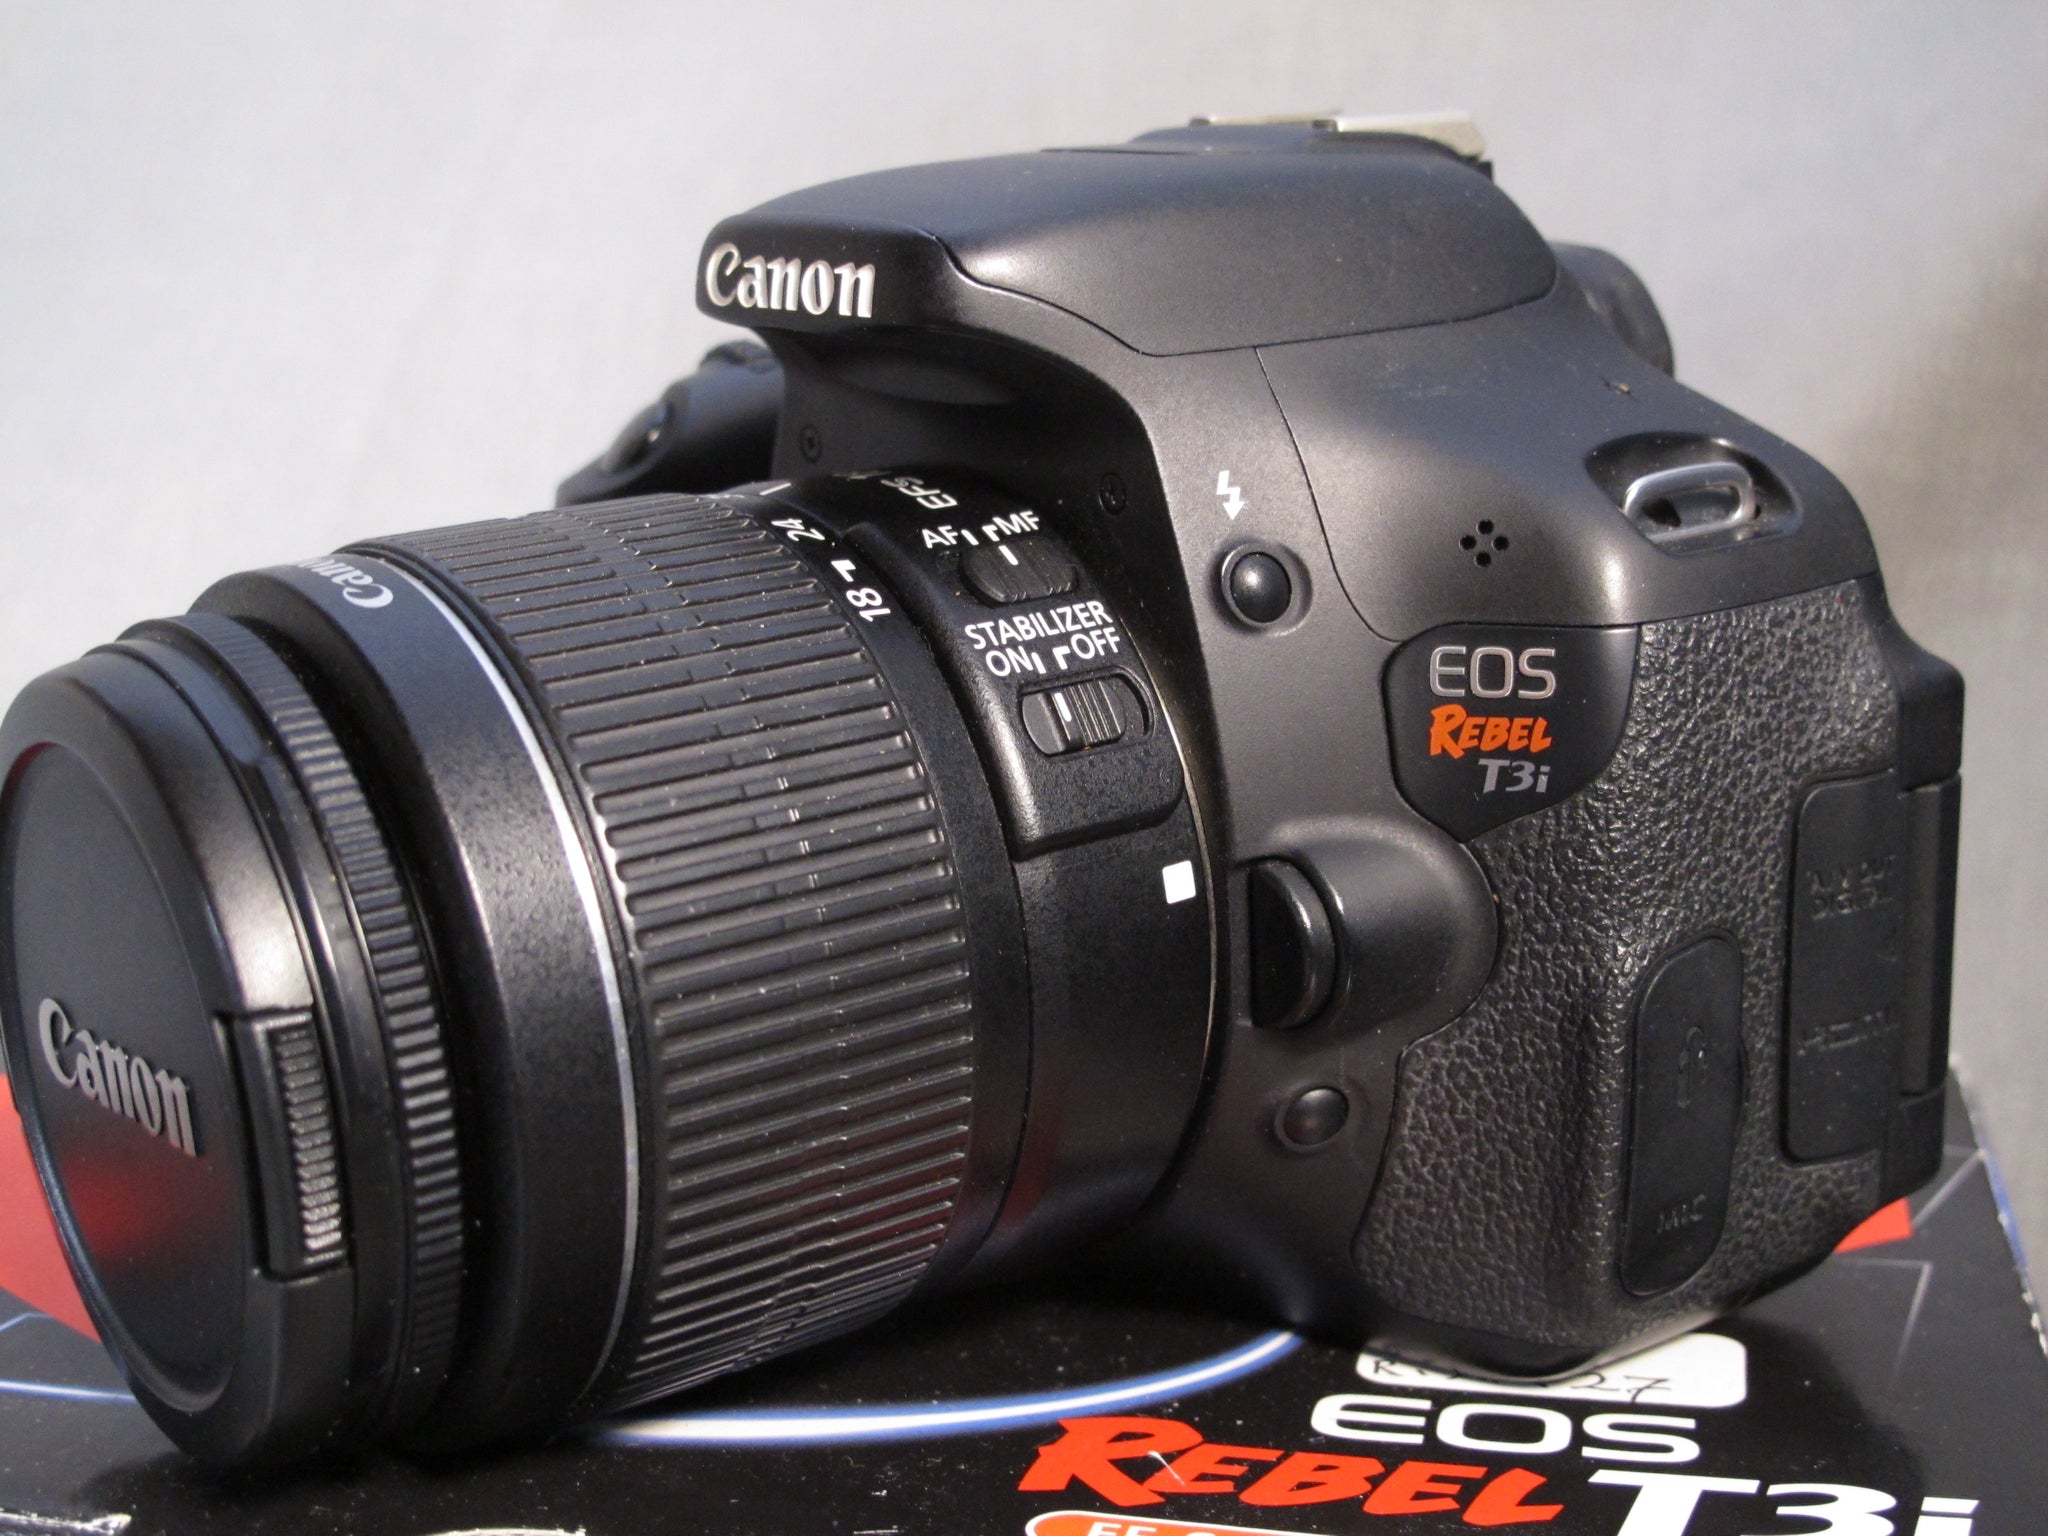 CANON EOS KISS X5 EF-S 18-55mm F3.5-5.6-